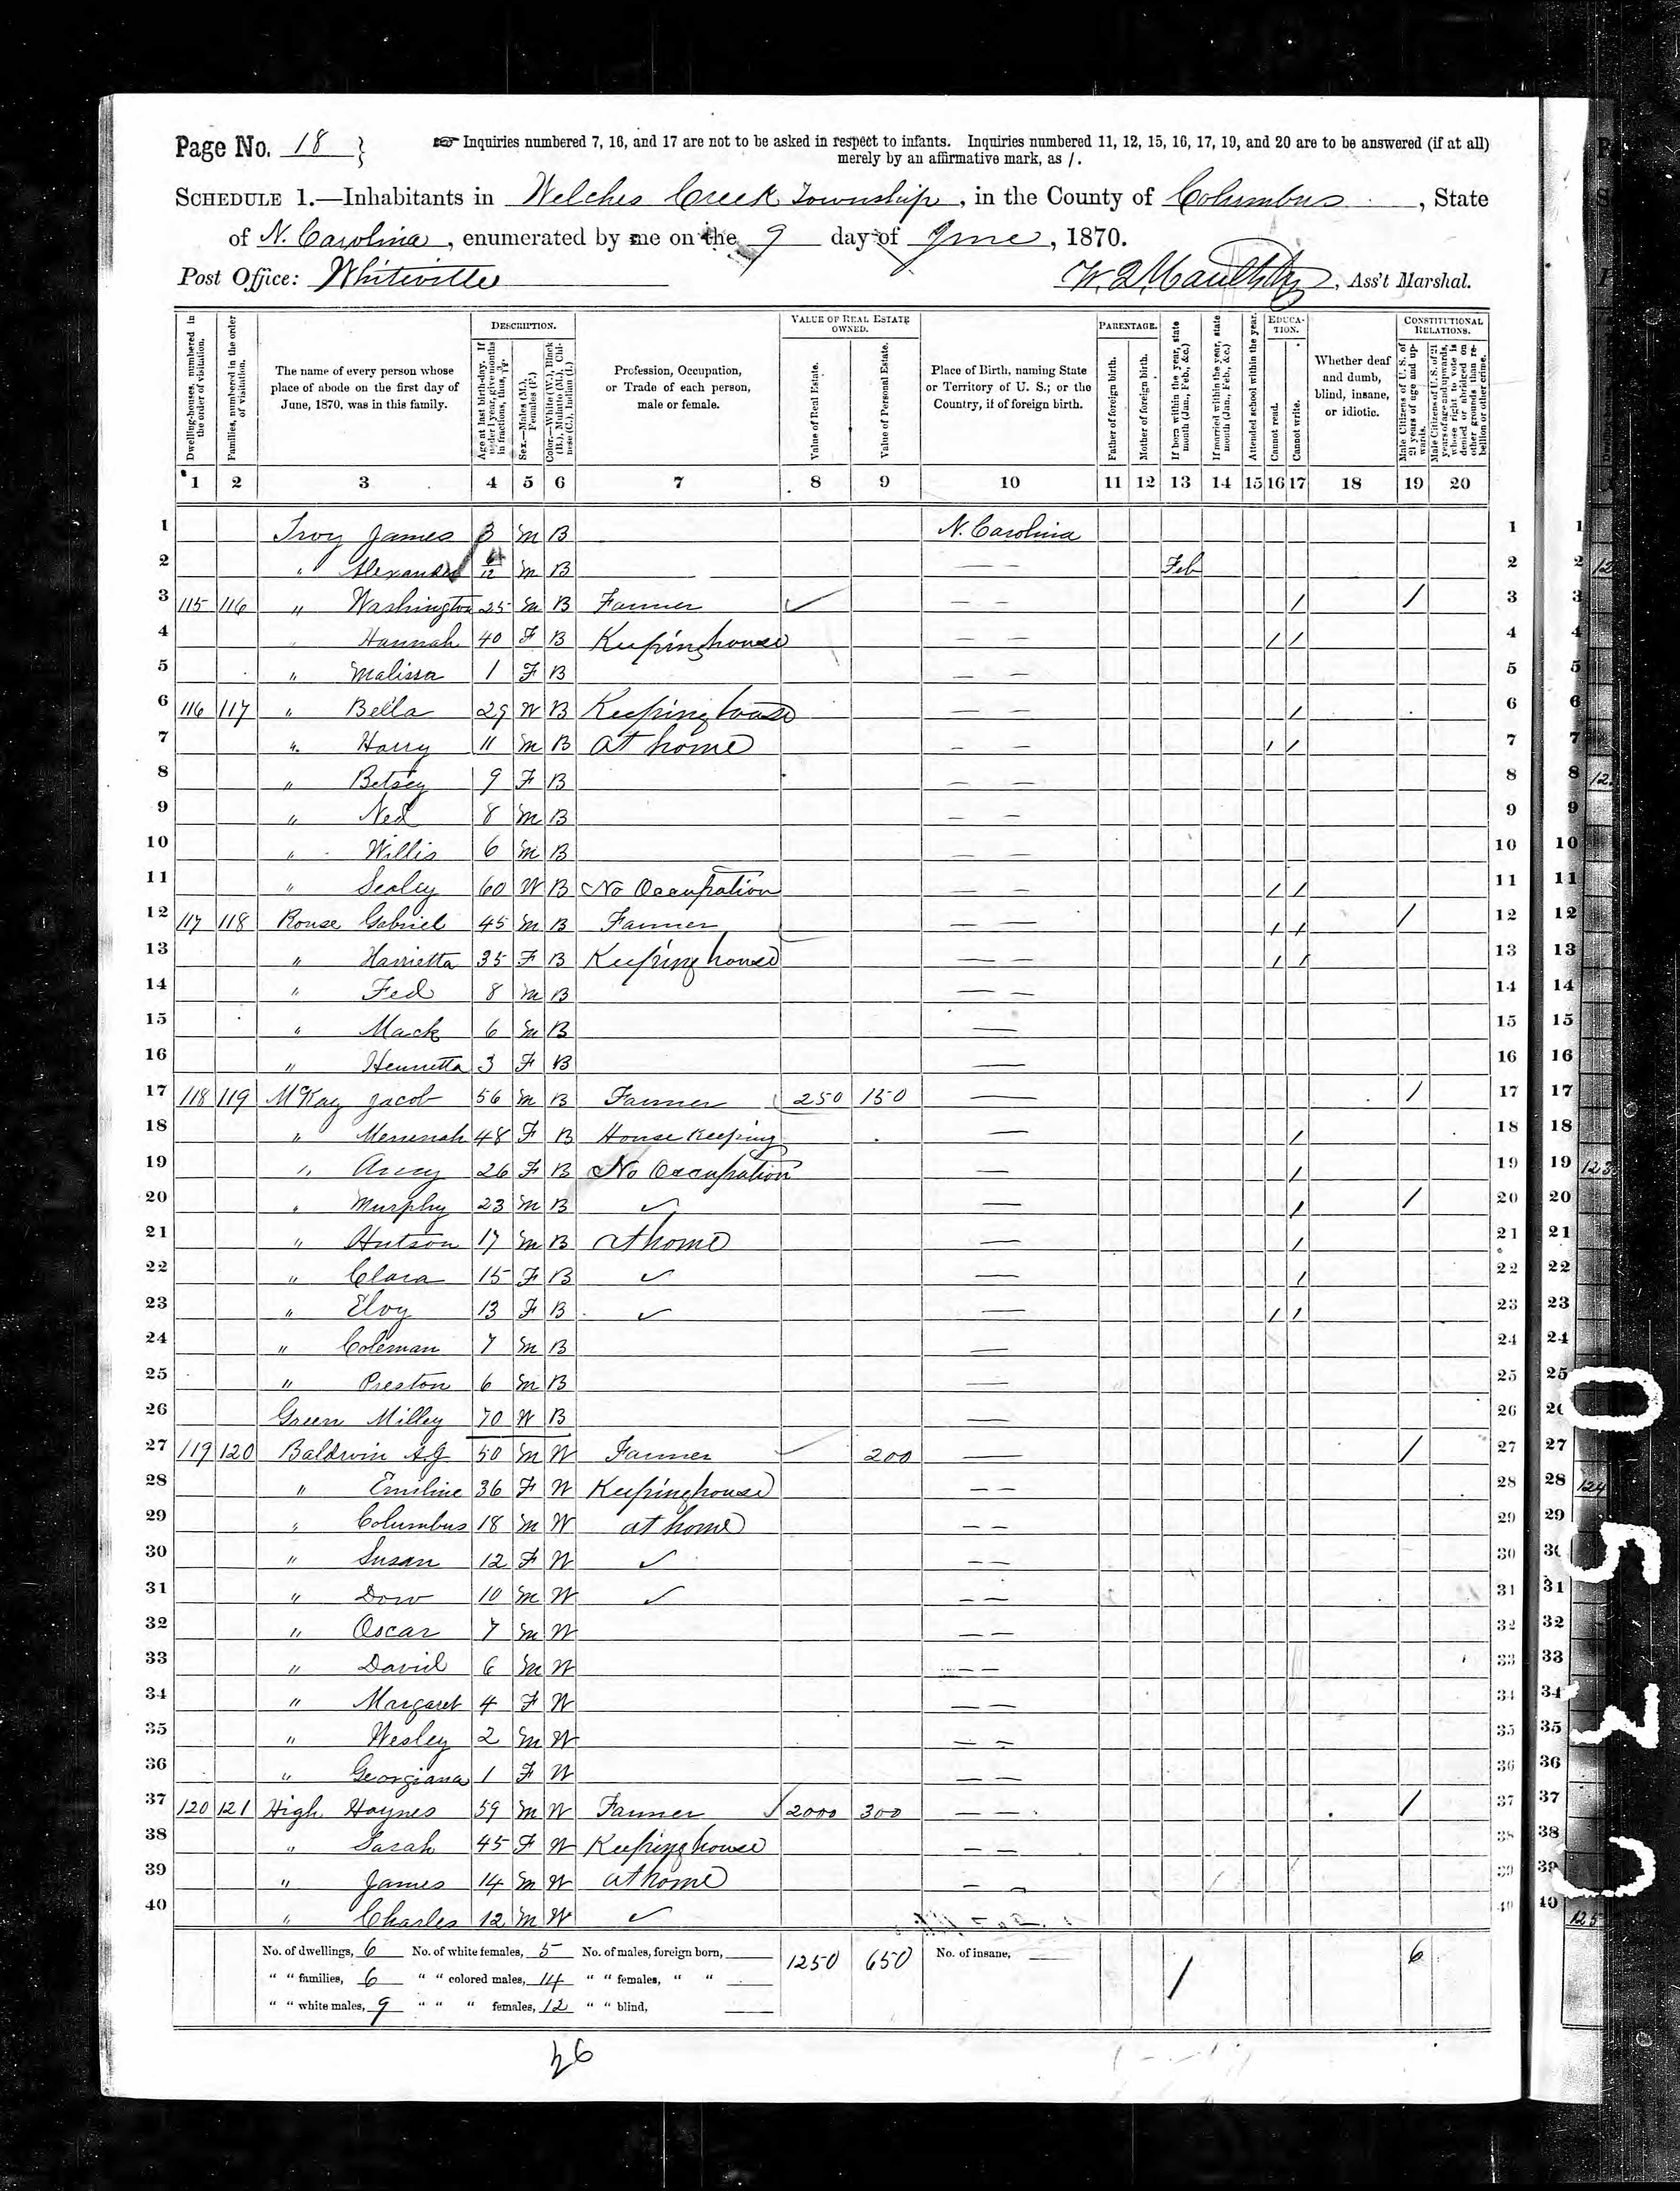 Image of census record that lists the McCoy family